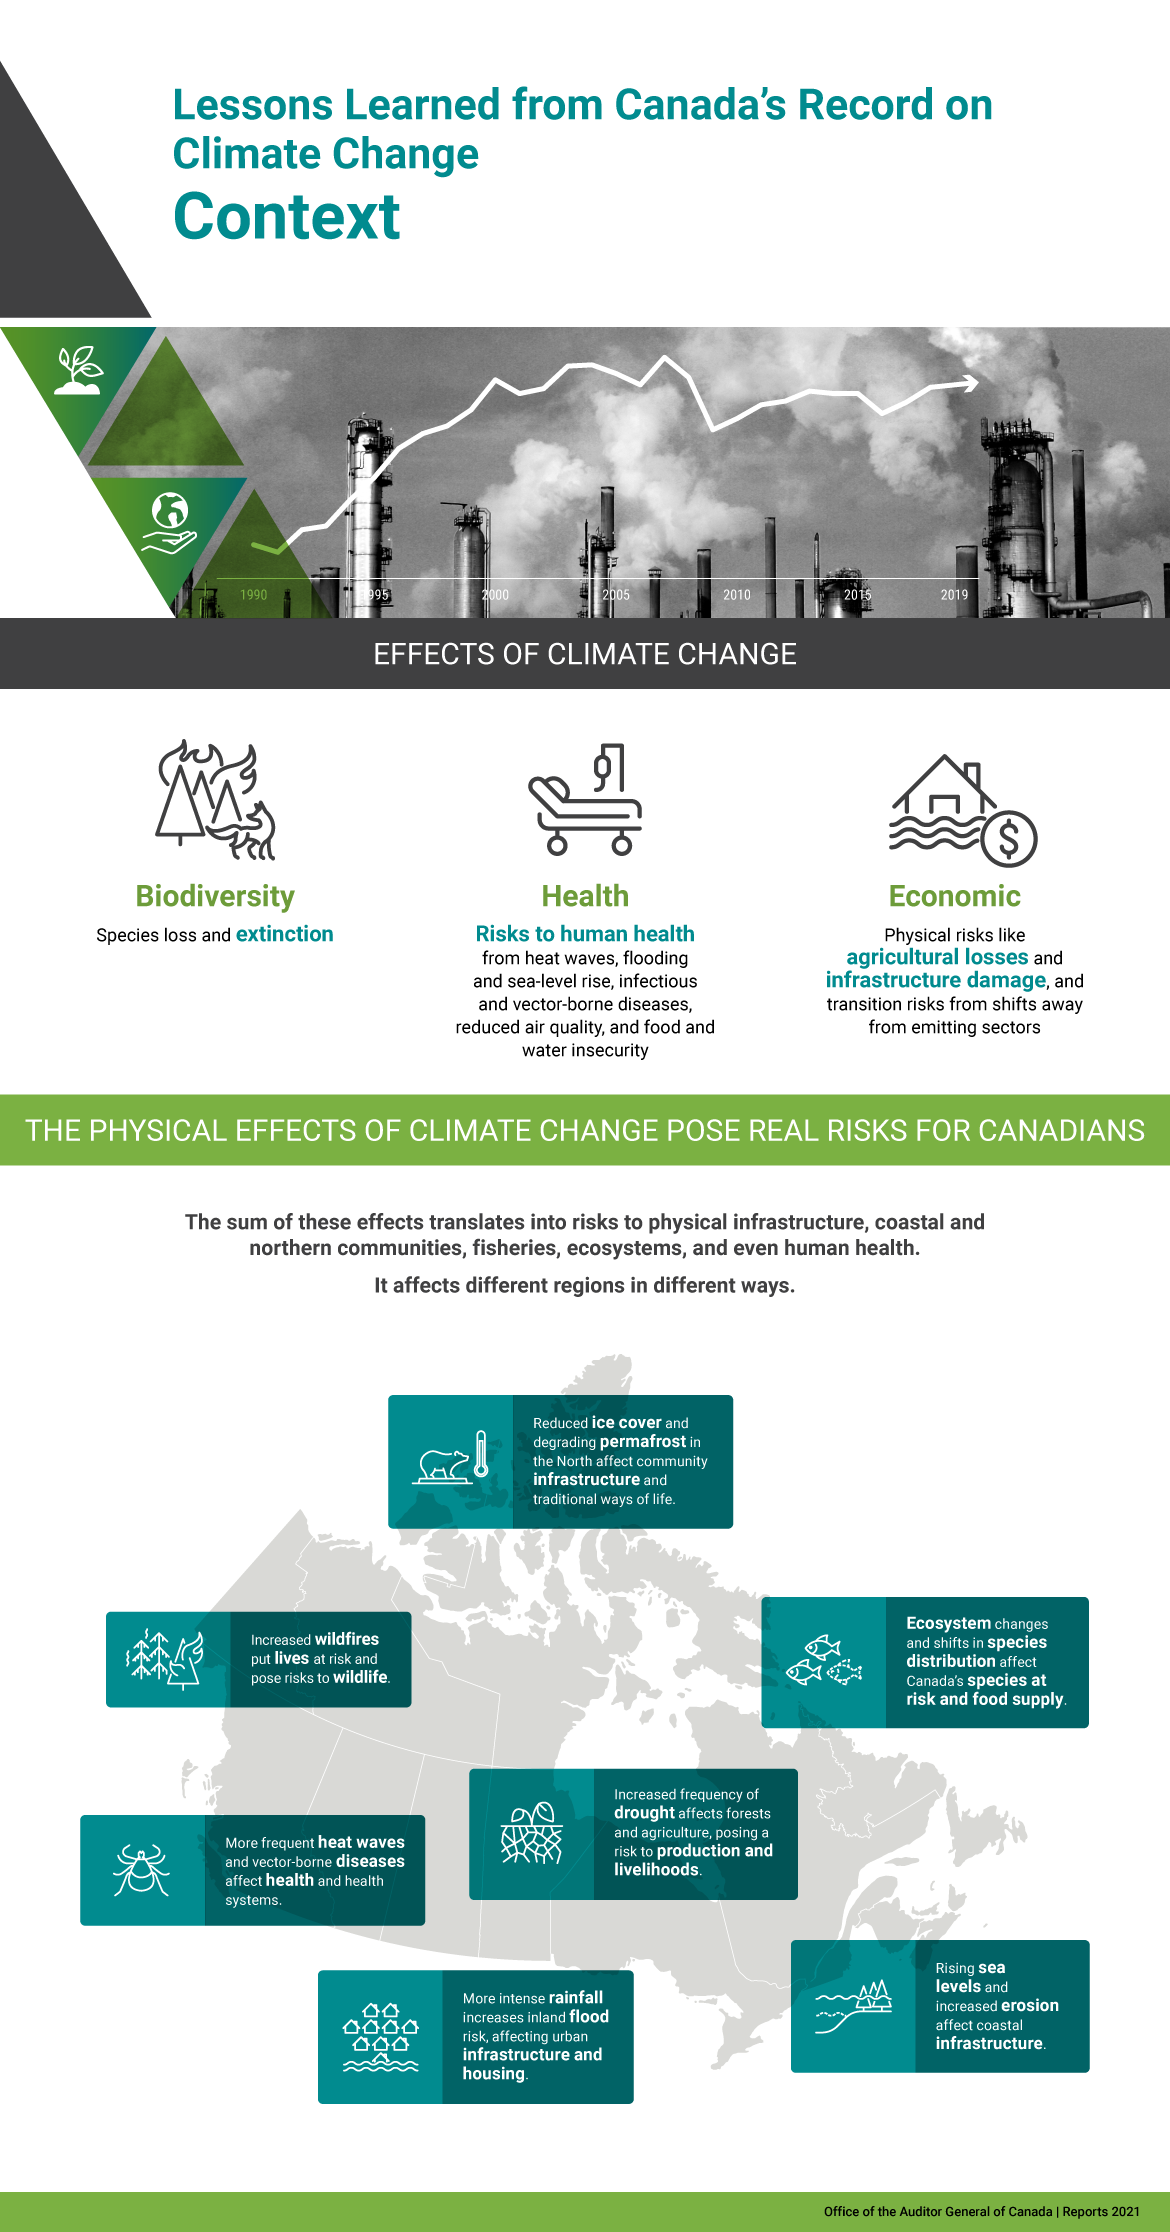 This infographic outlines the effects of climate change in Canada